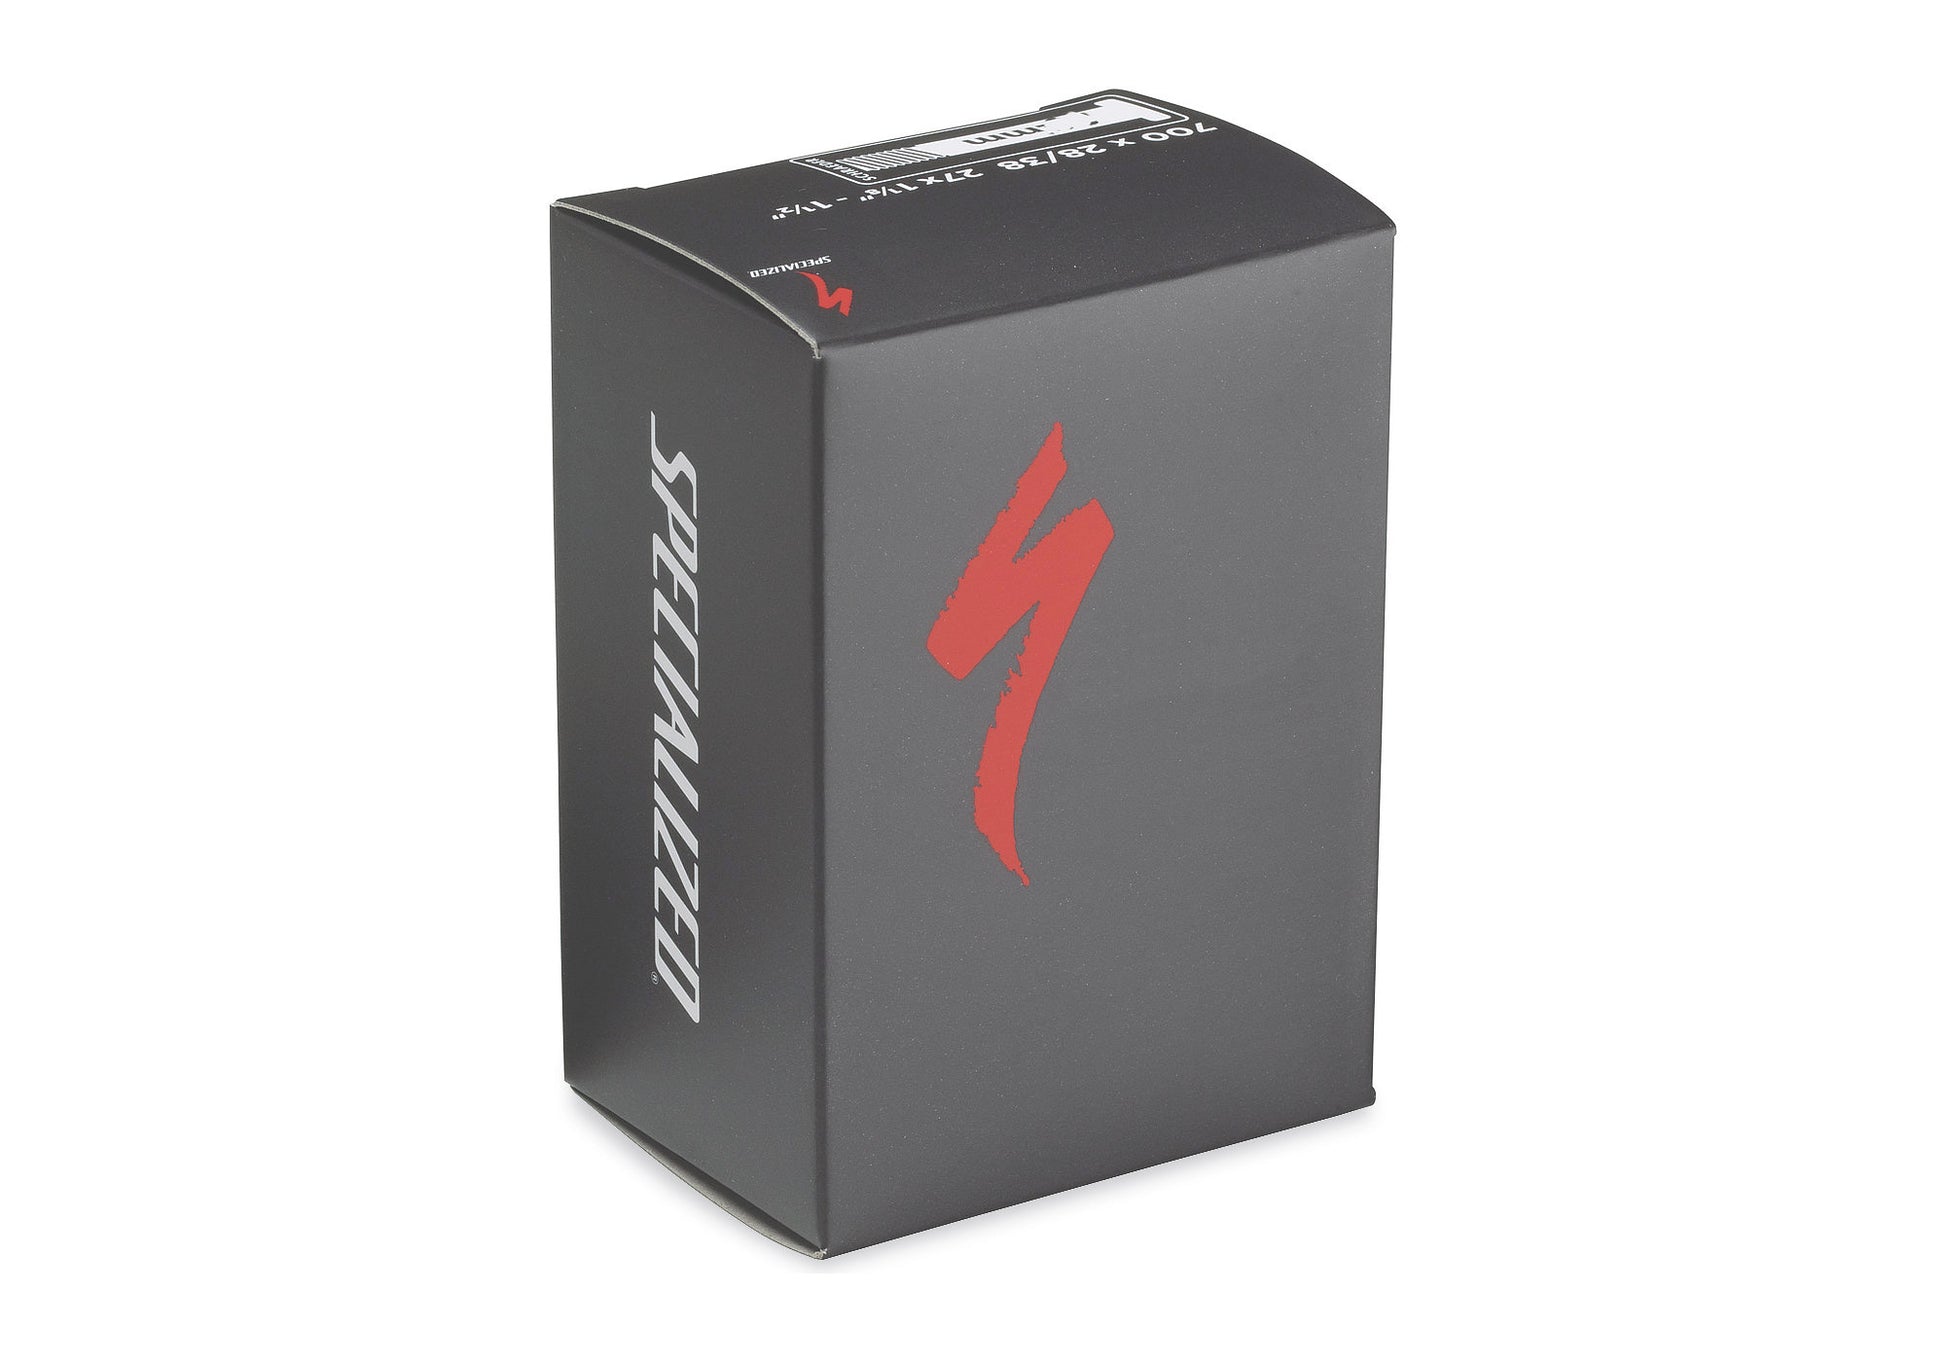 Specialized Schrader Valve Bicycle Tube 700 x 20-28mm